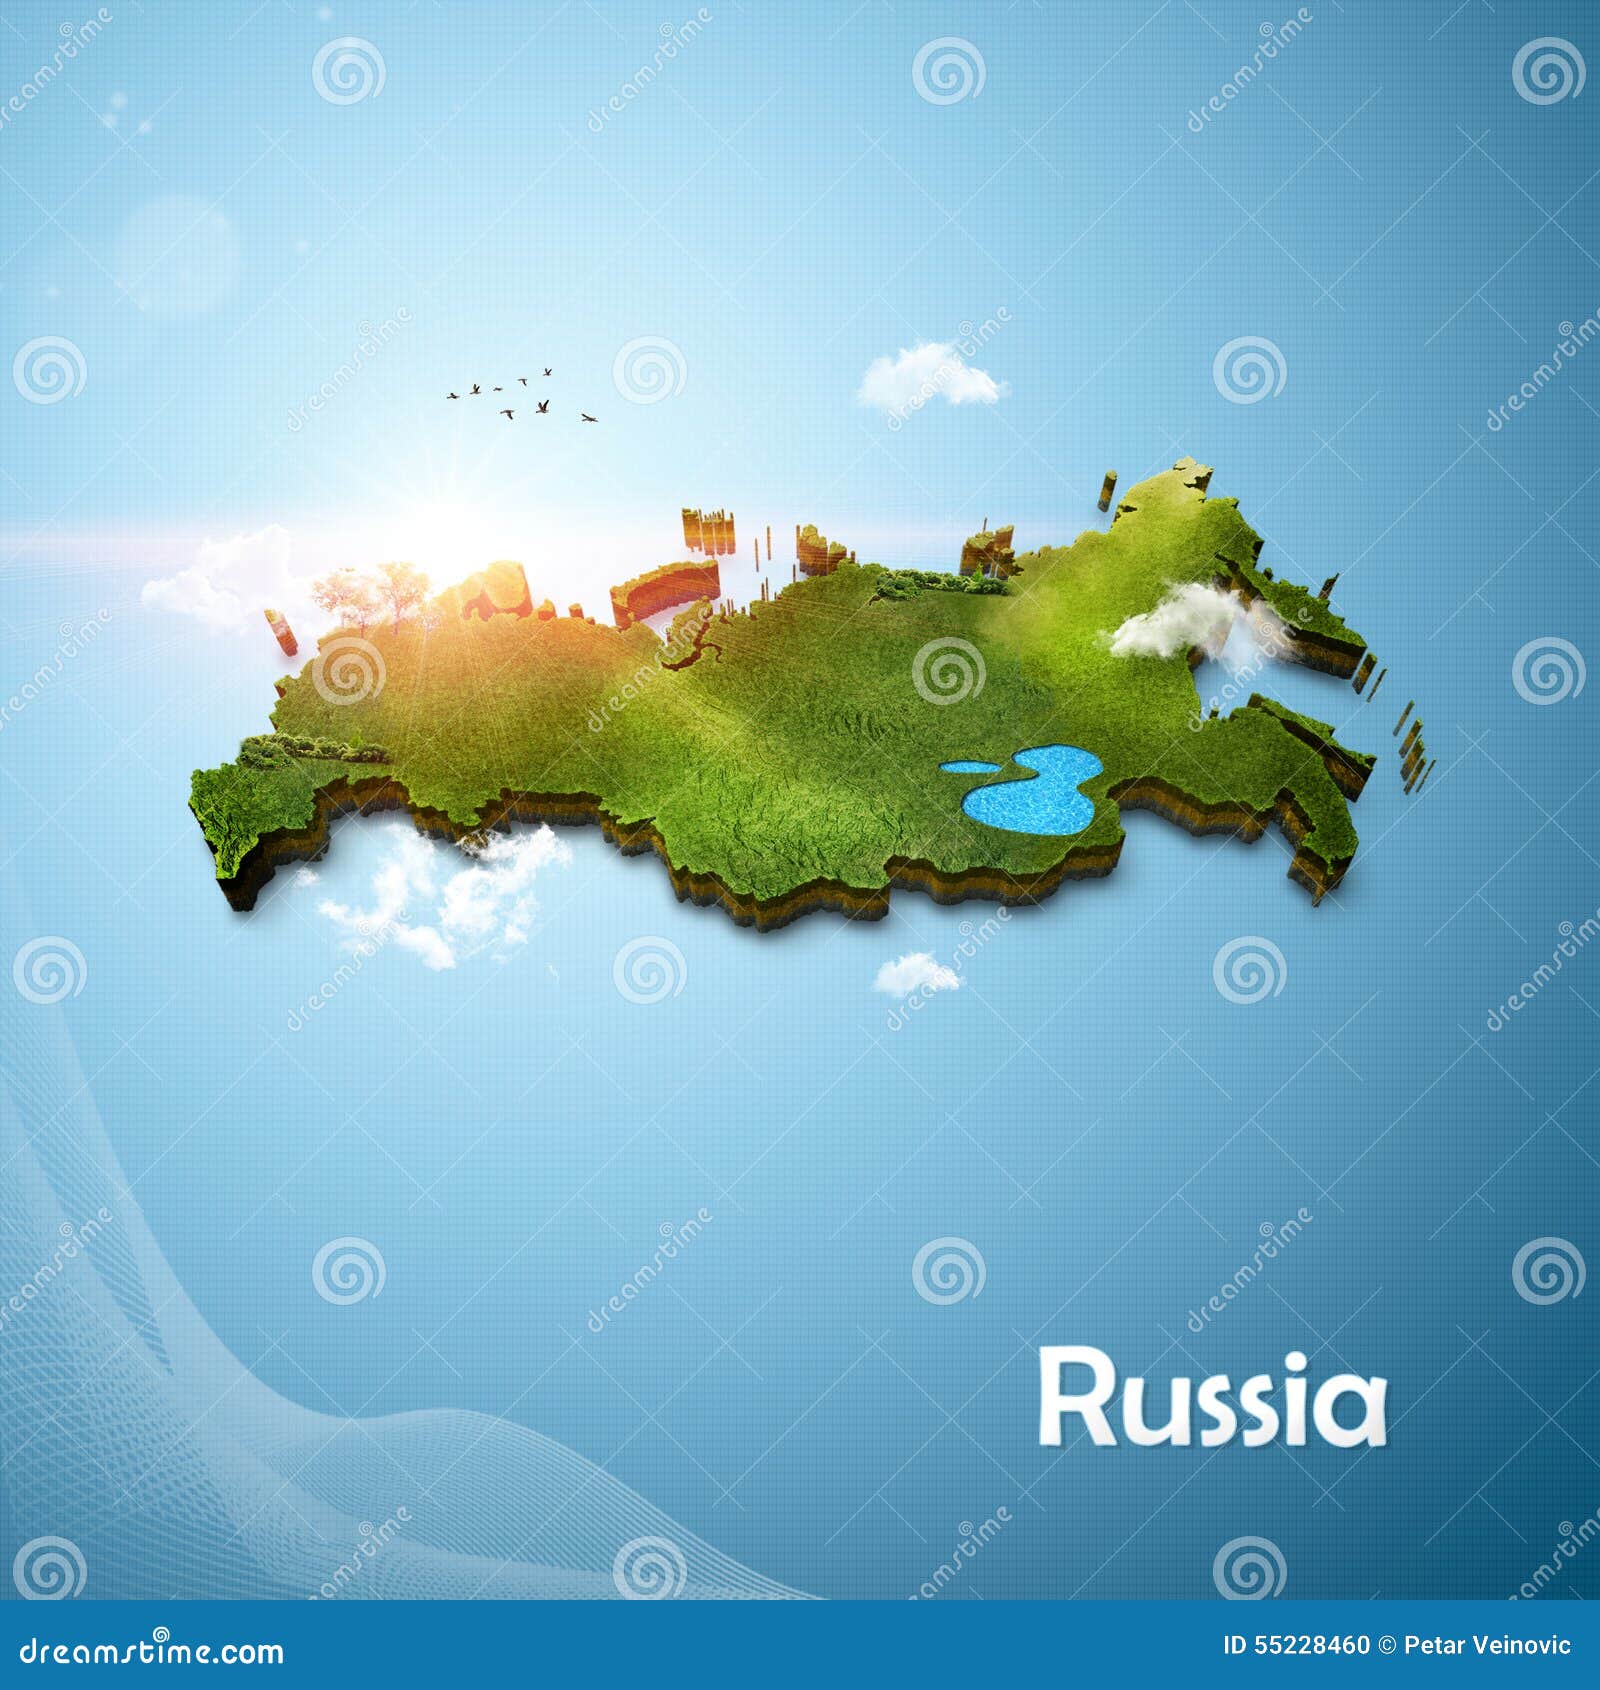 realistic 3d map of russia